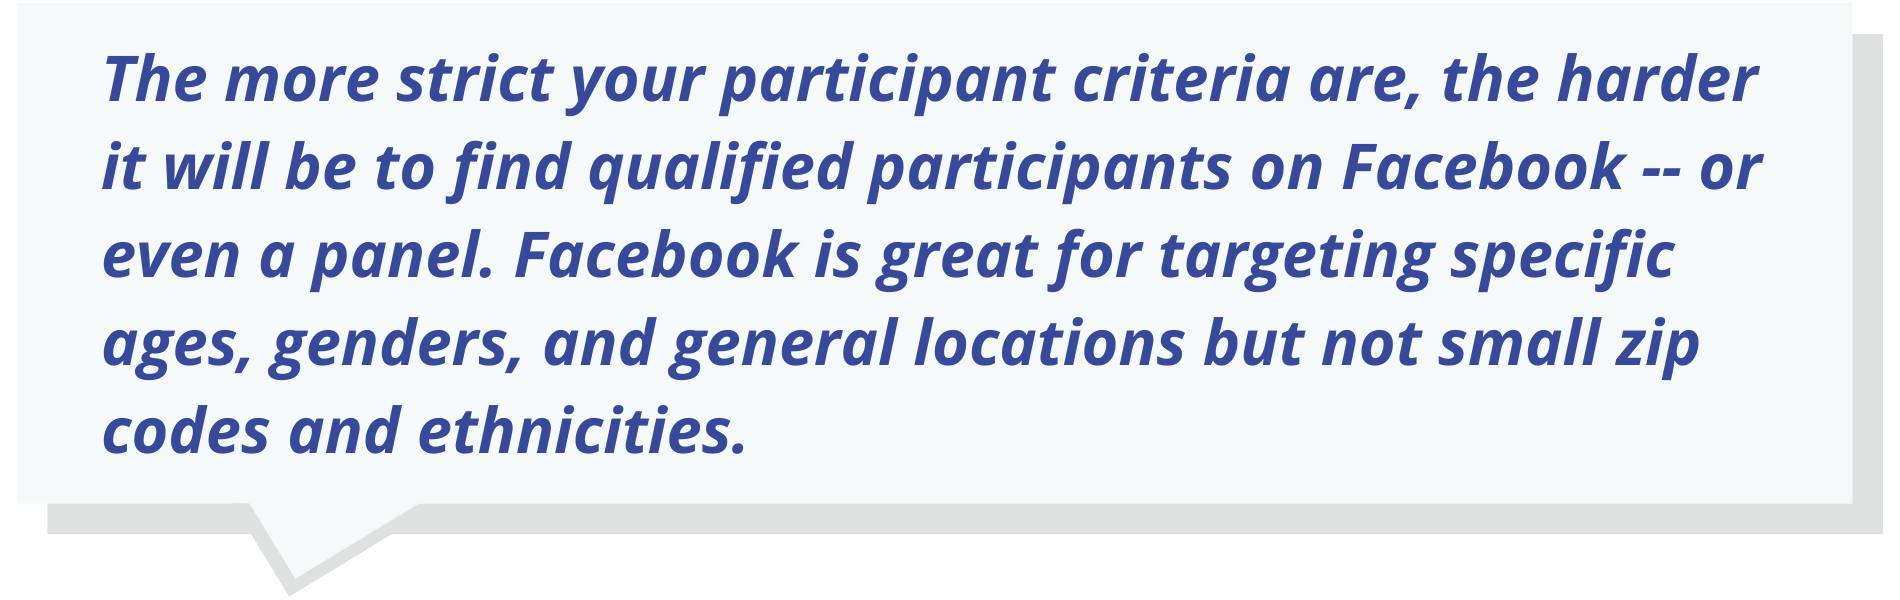 The more strict your participant criteria are, the harder it will be to find qualified participants on Facebook -- or even a panel. Facebook is great for targeting specific ages, genders, and general locations but not small zip codes and ethnicities.